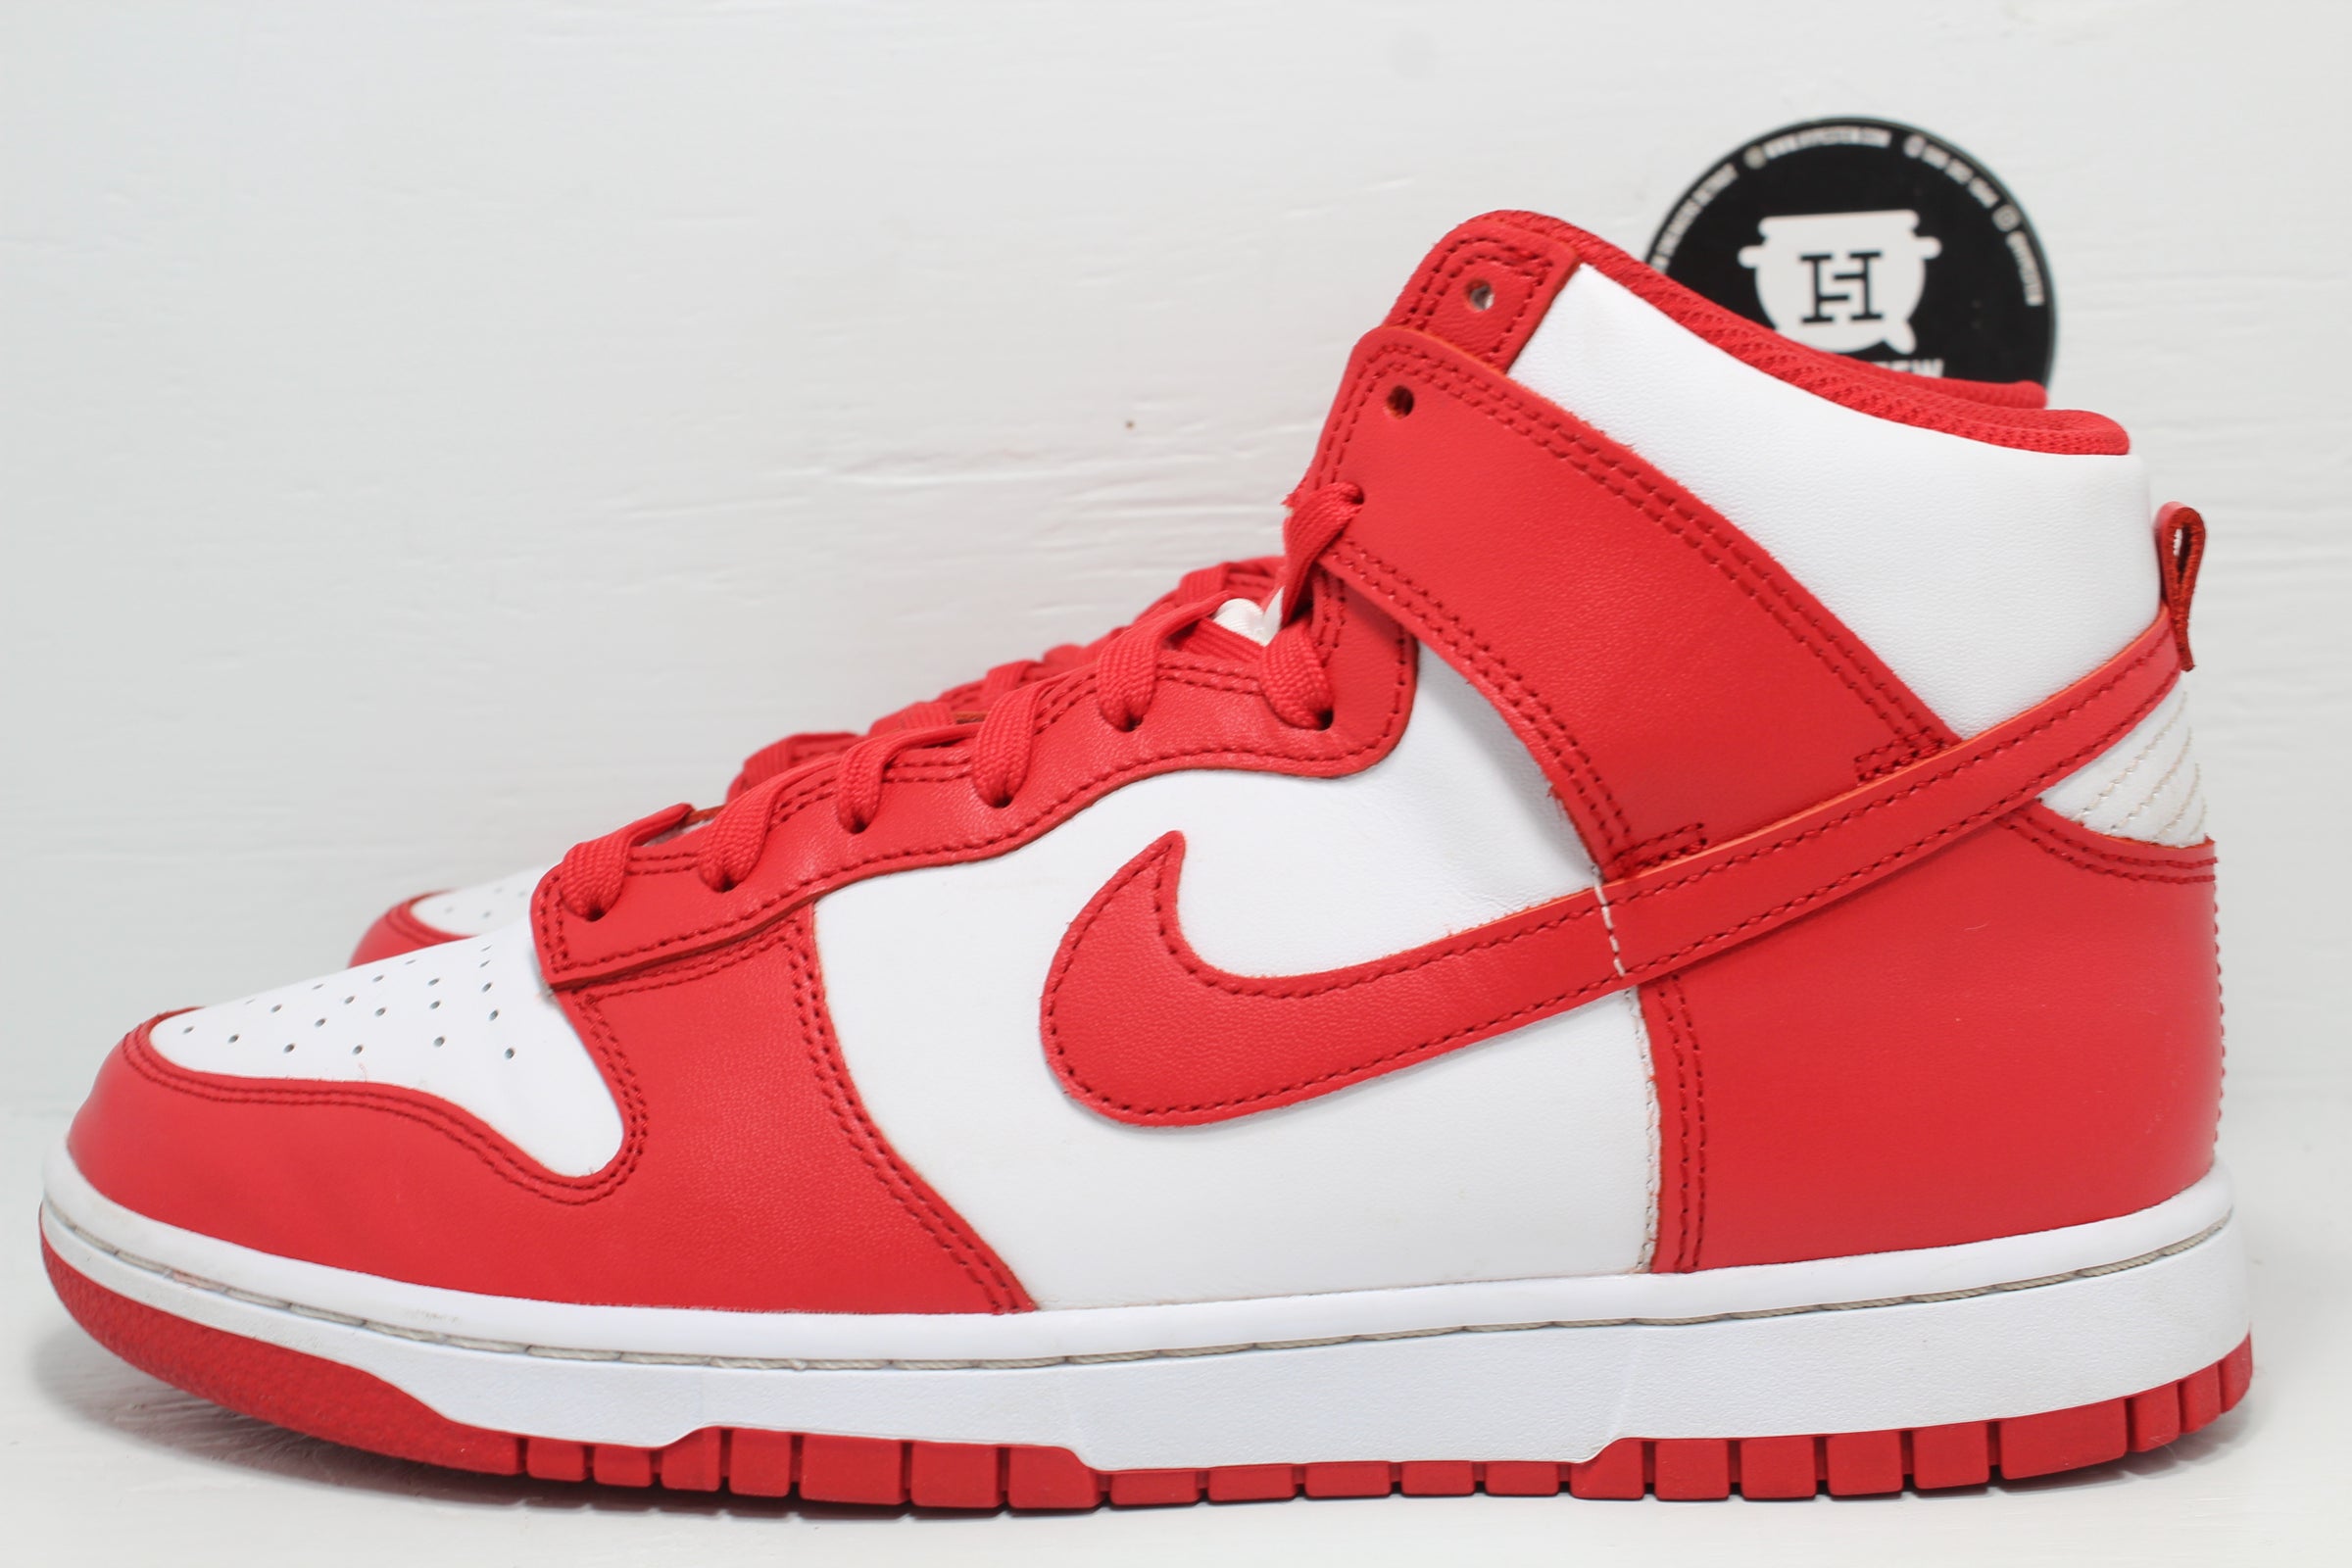 Nike Dunk High sneakers in white and red